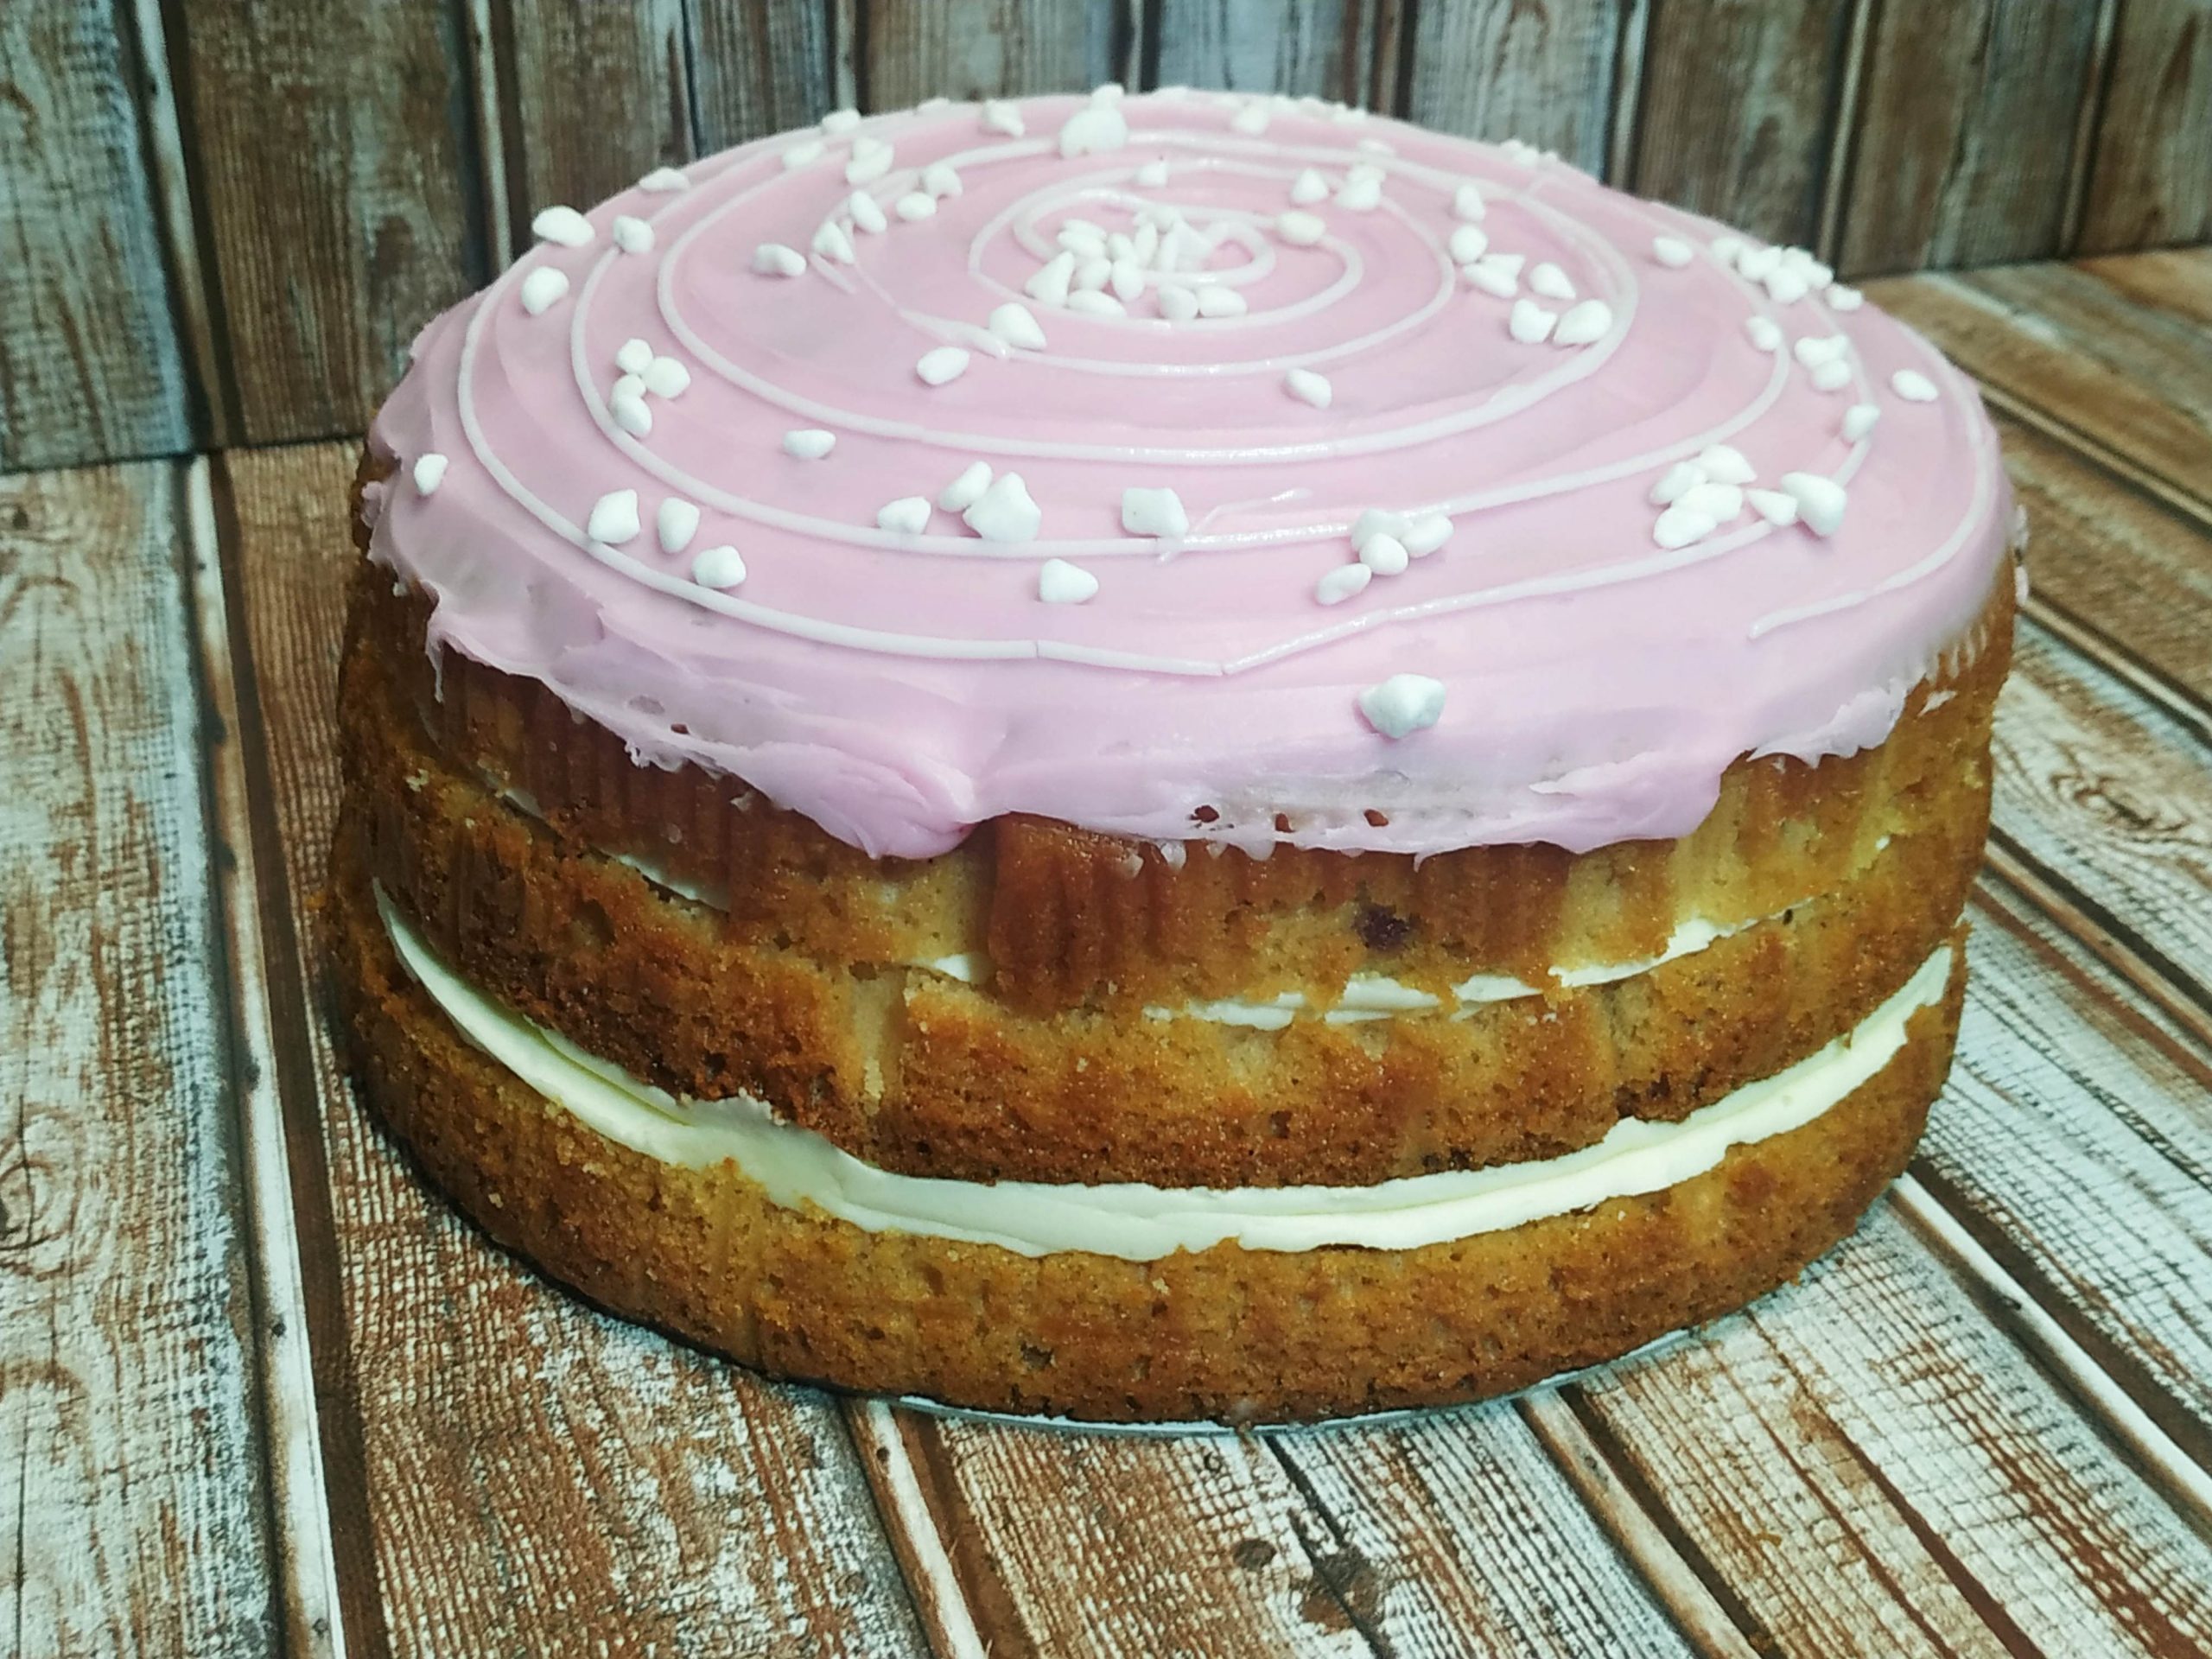 Raspberry Ripple Cake - Only available from Sandwich in the Square